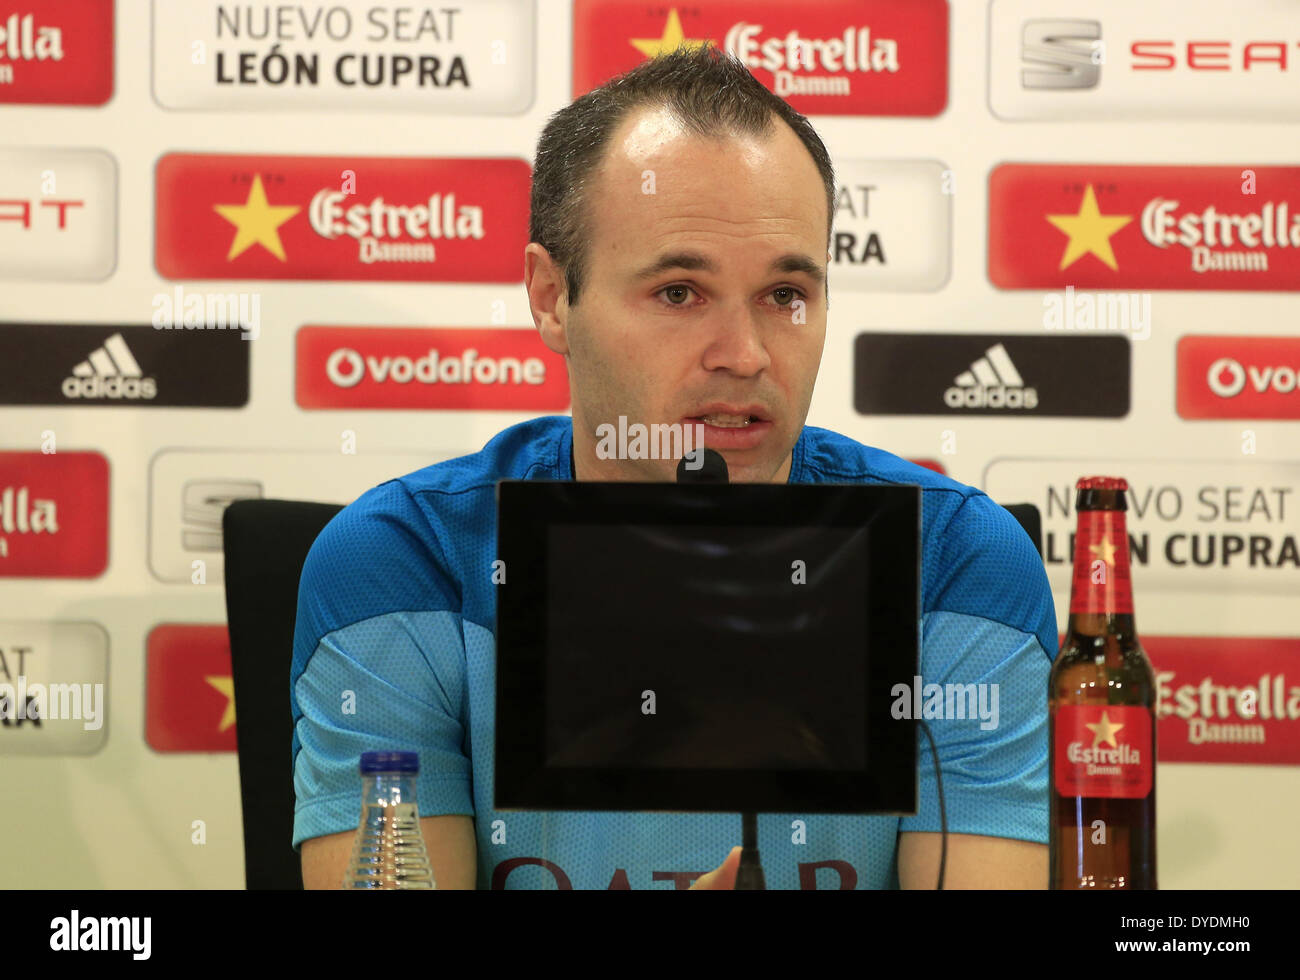 Barcelona, Spain. 15th Apr, 2014. BARCELONA-SPAIN April -15. Andrfes Iniesta in the FC Barcelona training and press conference preceding the final of the Copa del Rey, which took place at the Ciudad Deportiva Joan Gamper of FC Barcelona, ''on April 5, 2014 Photo: Joan Valls/Urbanandsport /Nurphoto © Joan Valls/NurPhoto/ZUMAPRESS.com/Alamy Live News Stock Photo